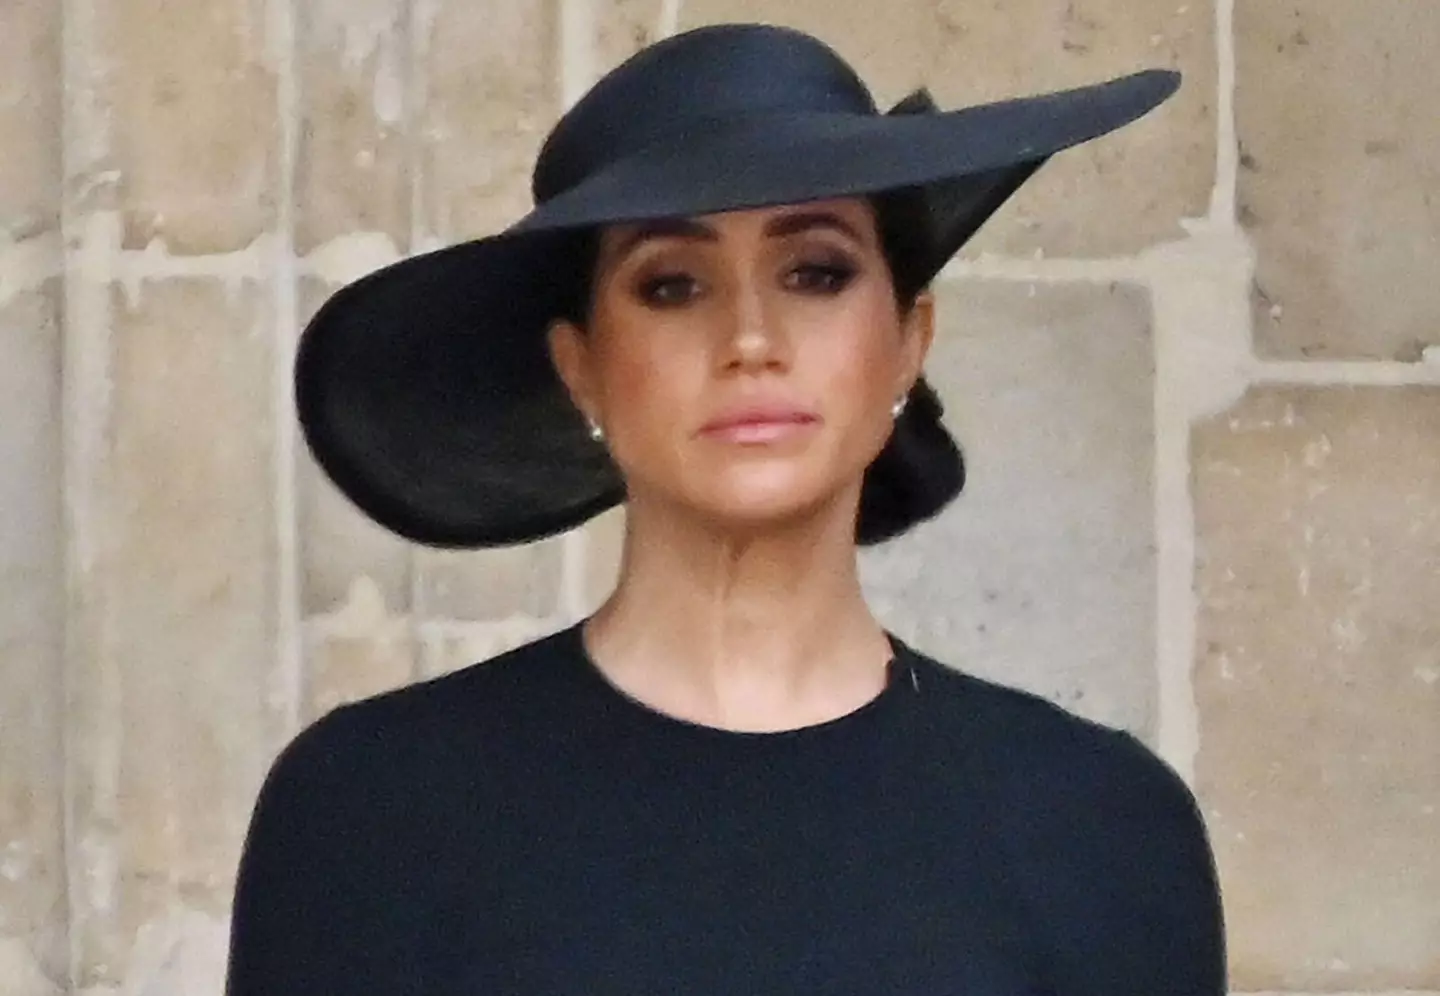 Markle at the State Funeral for the Queen.